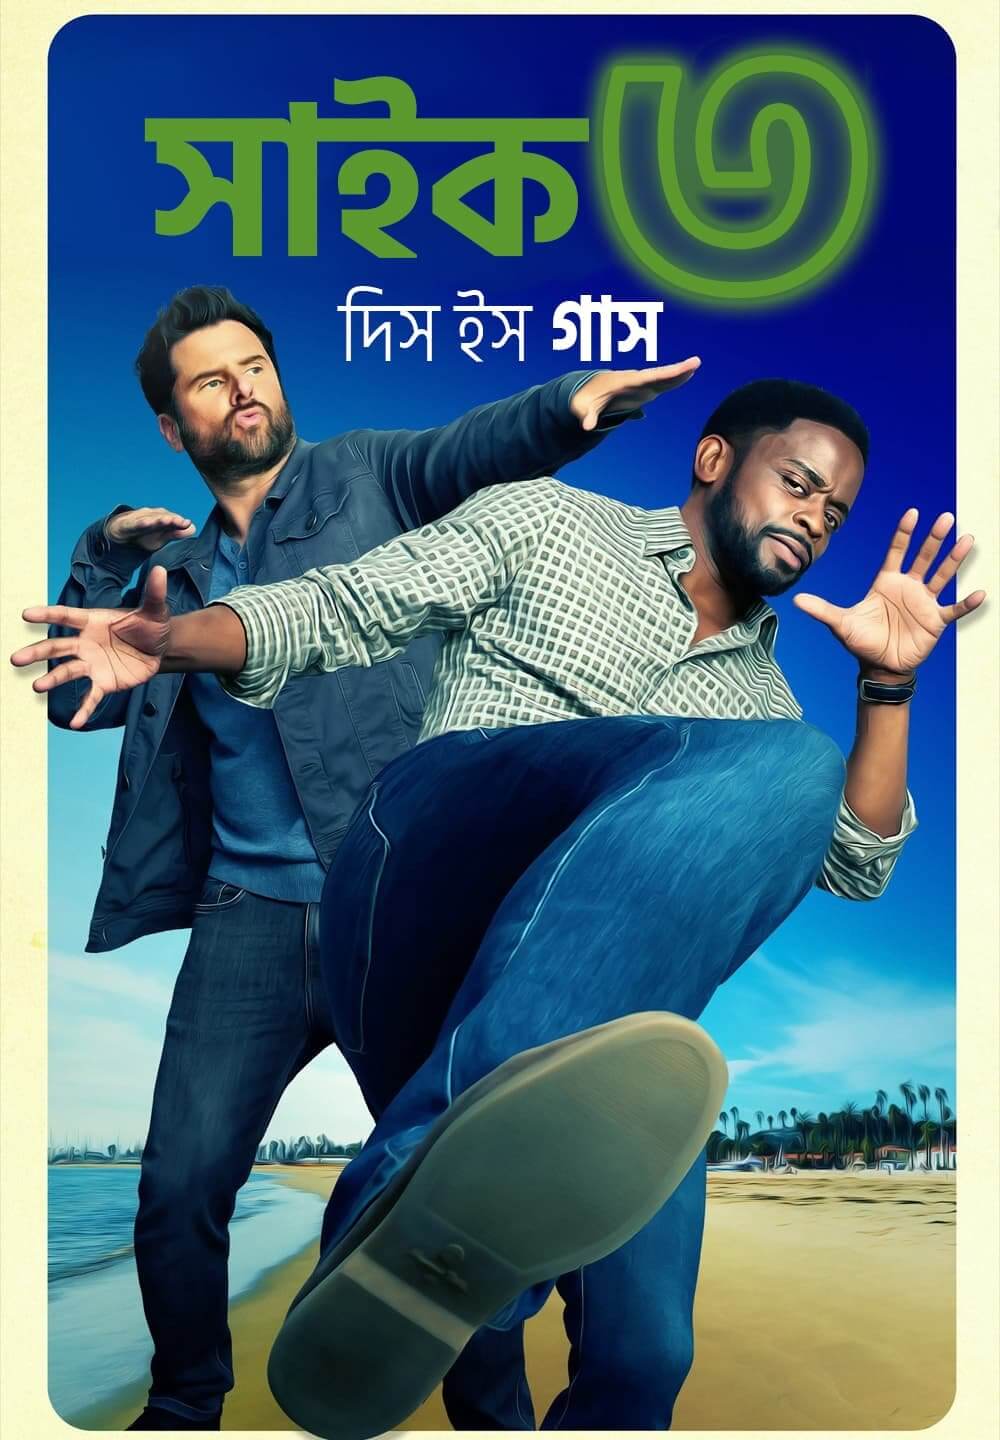 Psych 3: This Is Gus 2022 Bangla Dubbed 720p HDRip 800MB Download